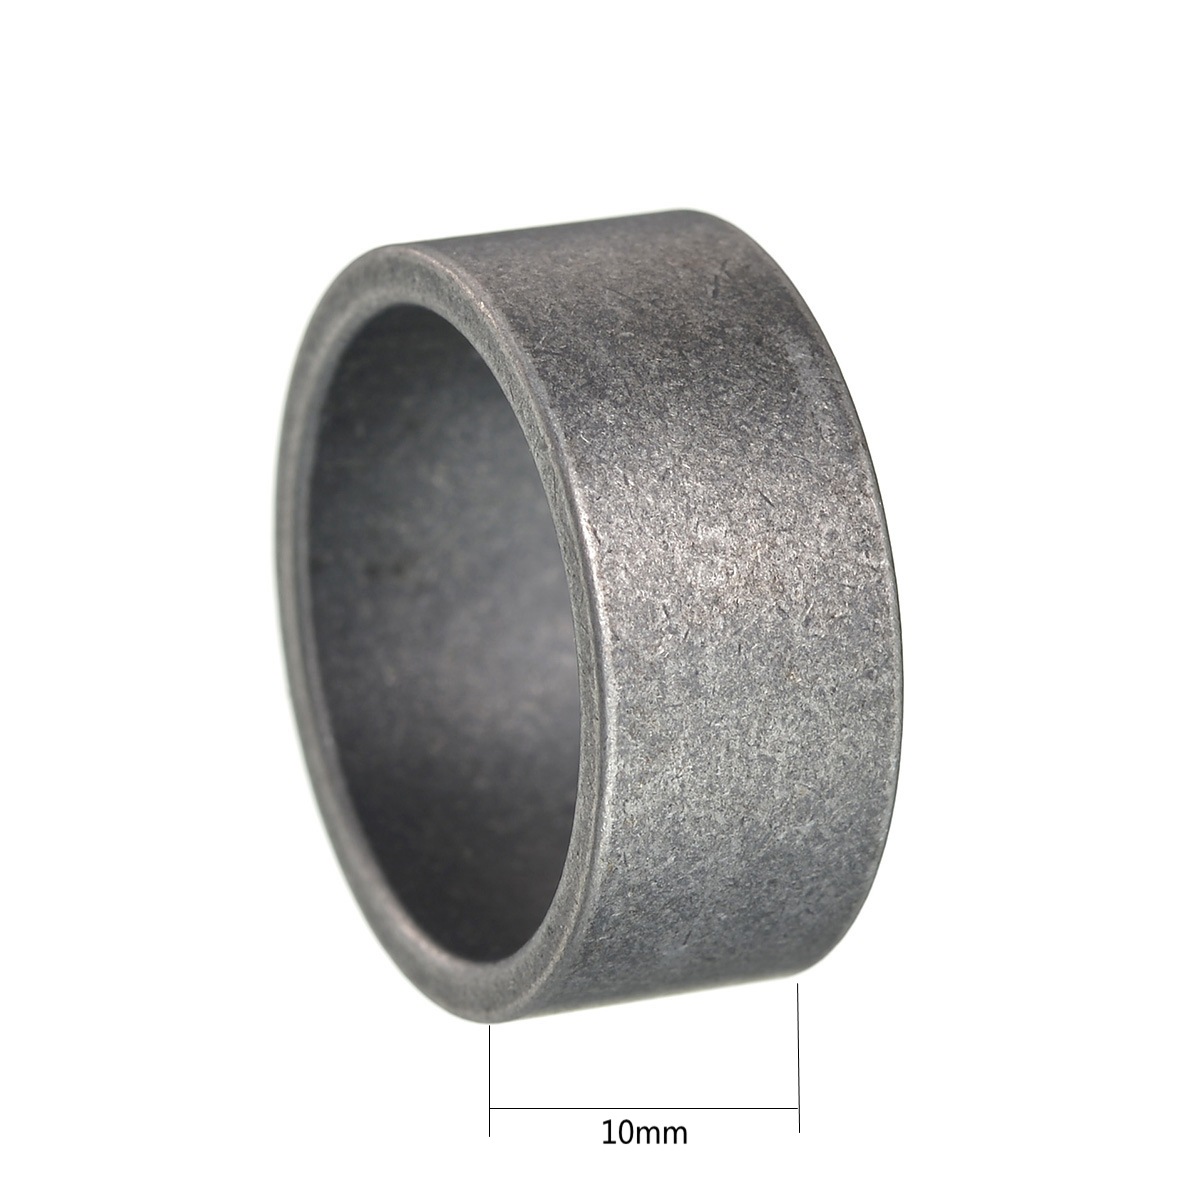 10mm antique silver finish 7